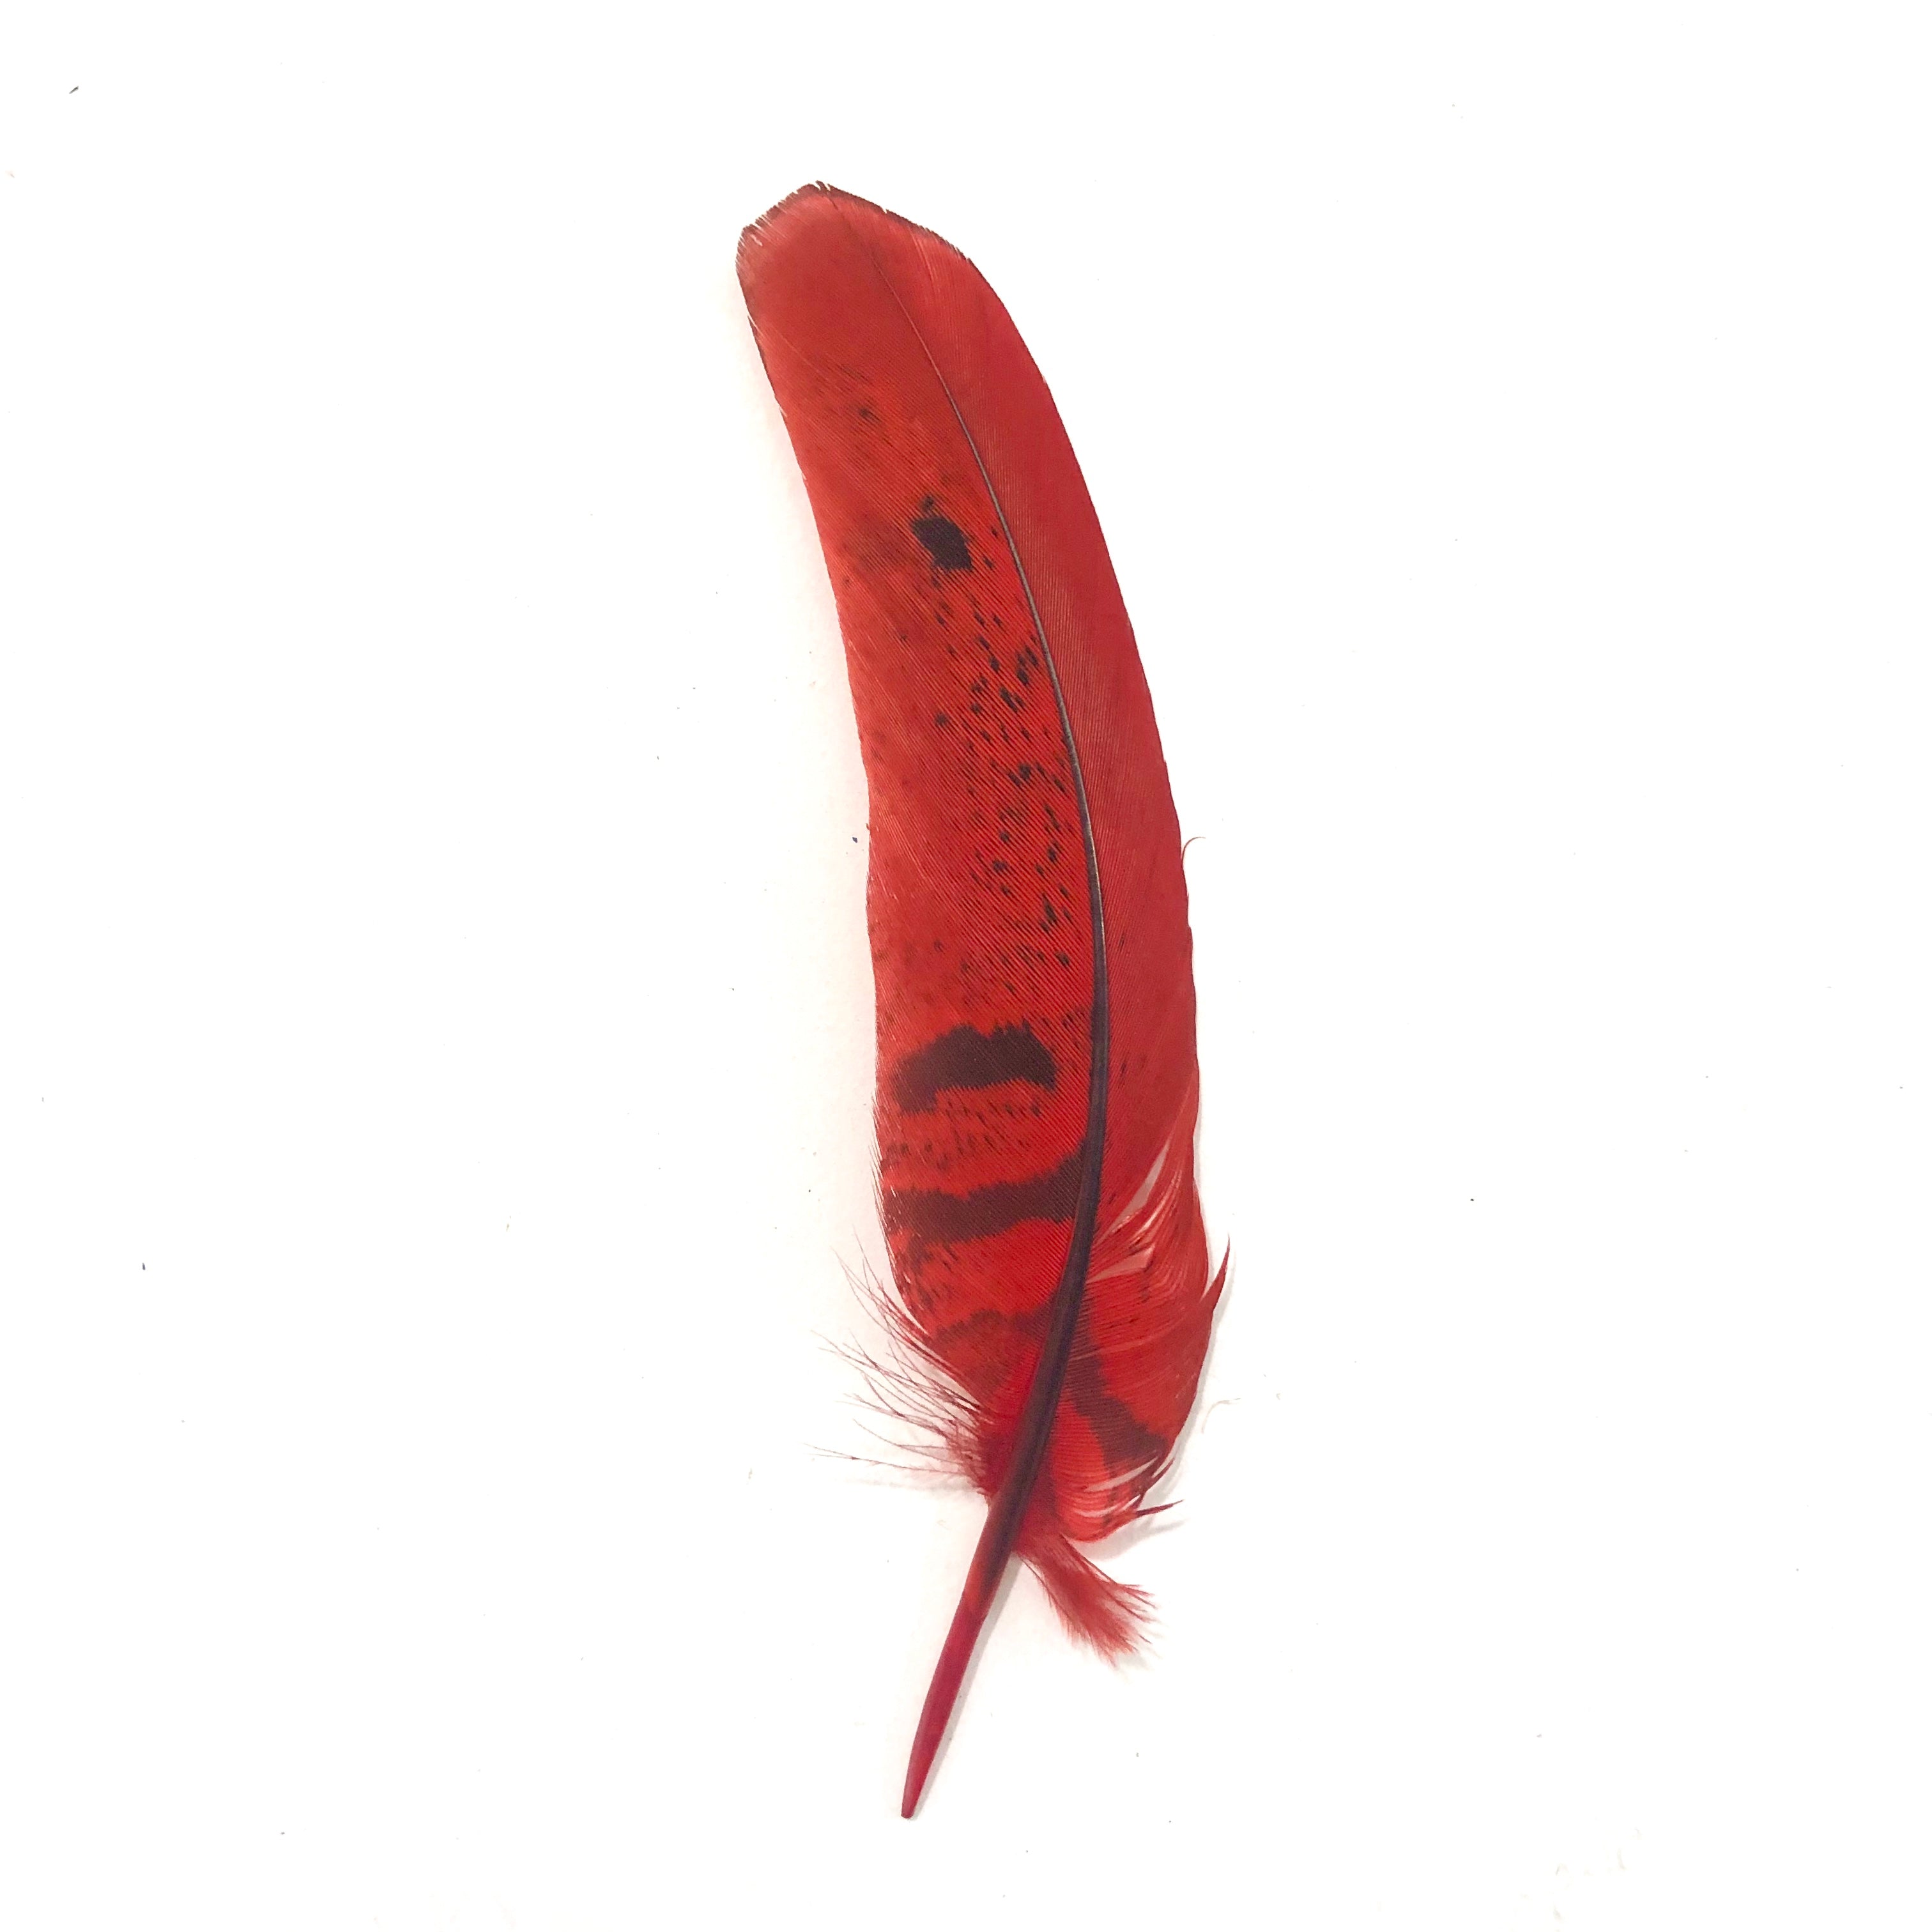 Under 6" Reeves Pheasant Tail Feather x 10 pcs - Red